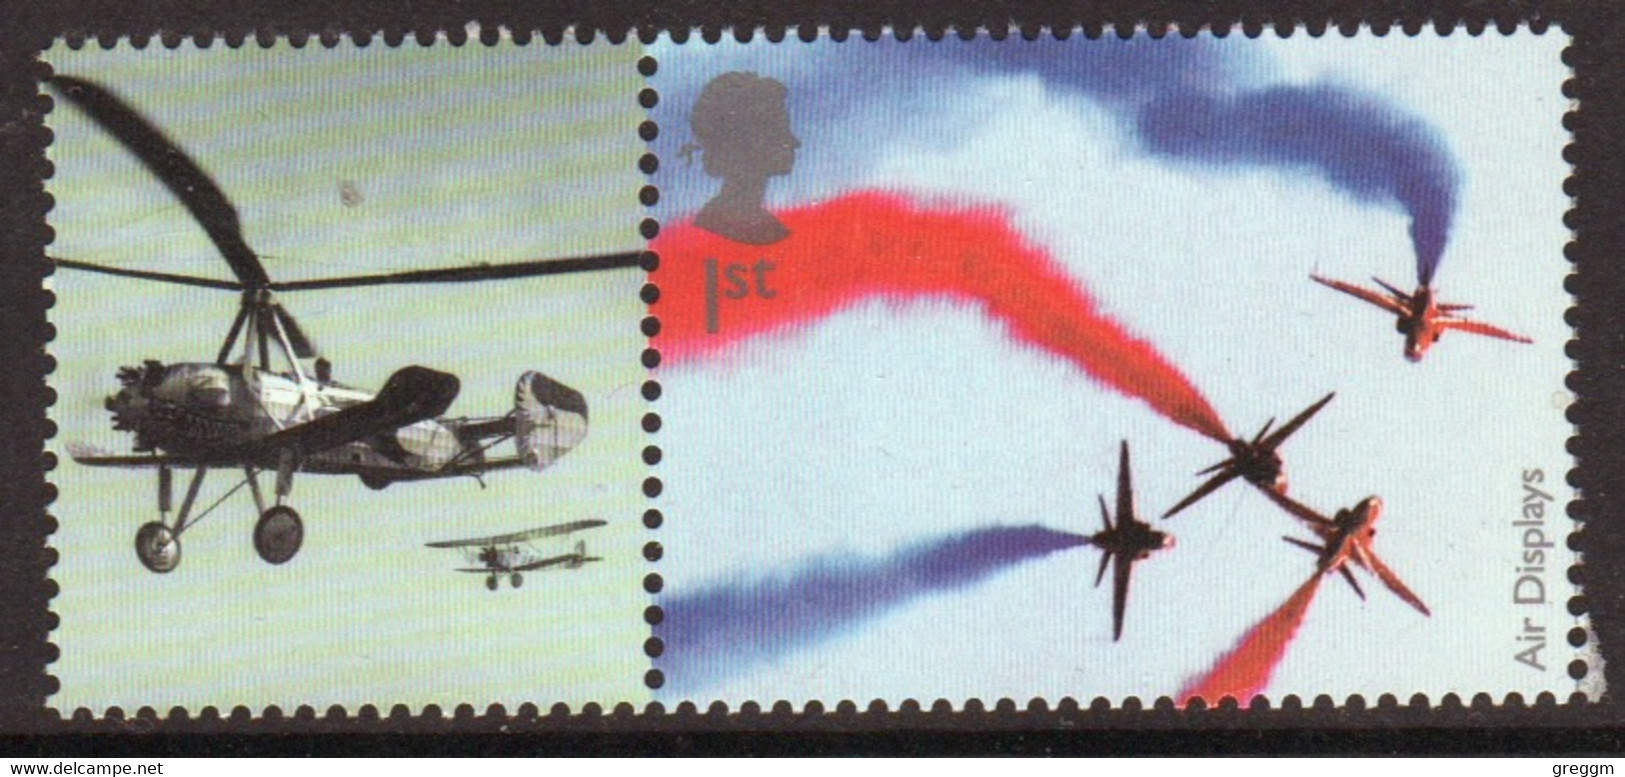 Great Britain 2008 Single 1st Smiler Sheet Commemorative Stamp With Labels From The Air Display Set In Unmounted Mint. - Personalisierte Briefmarken